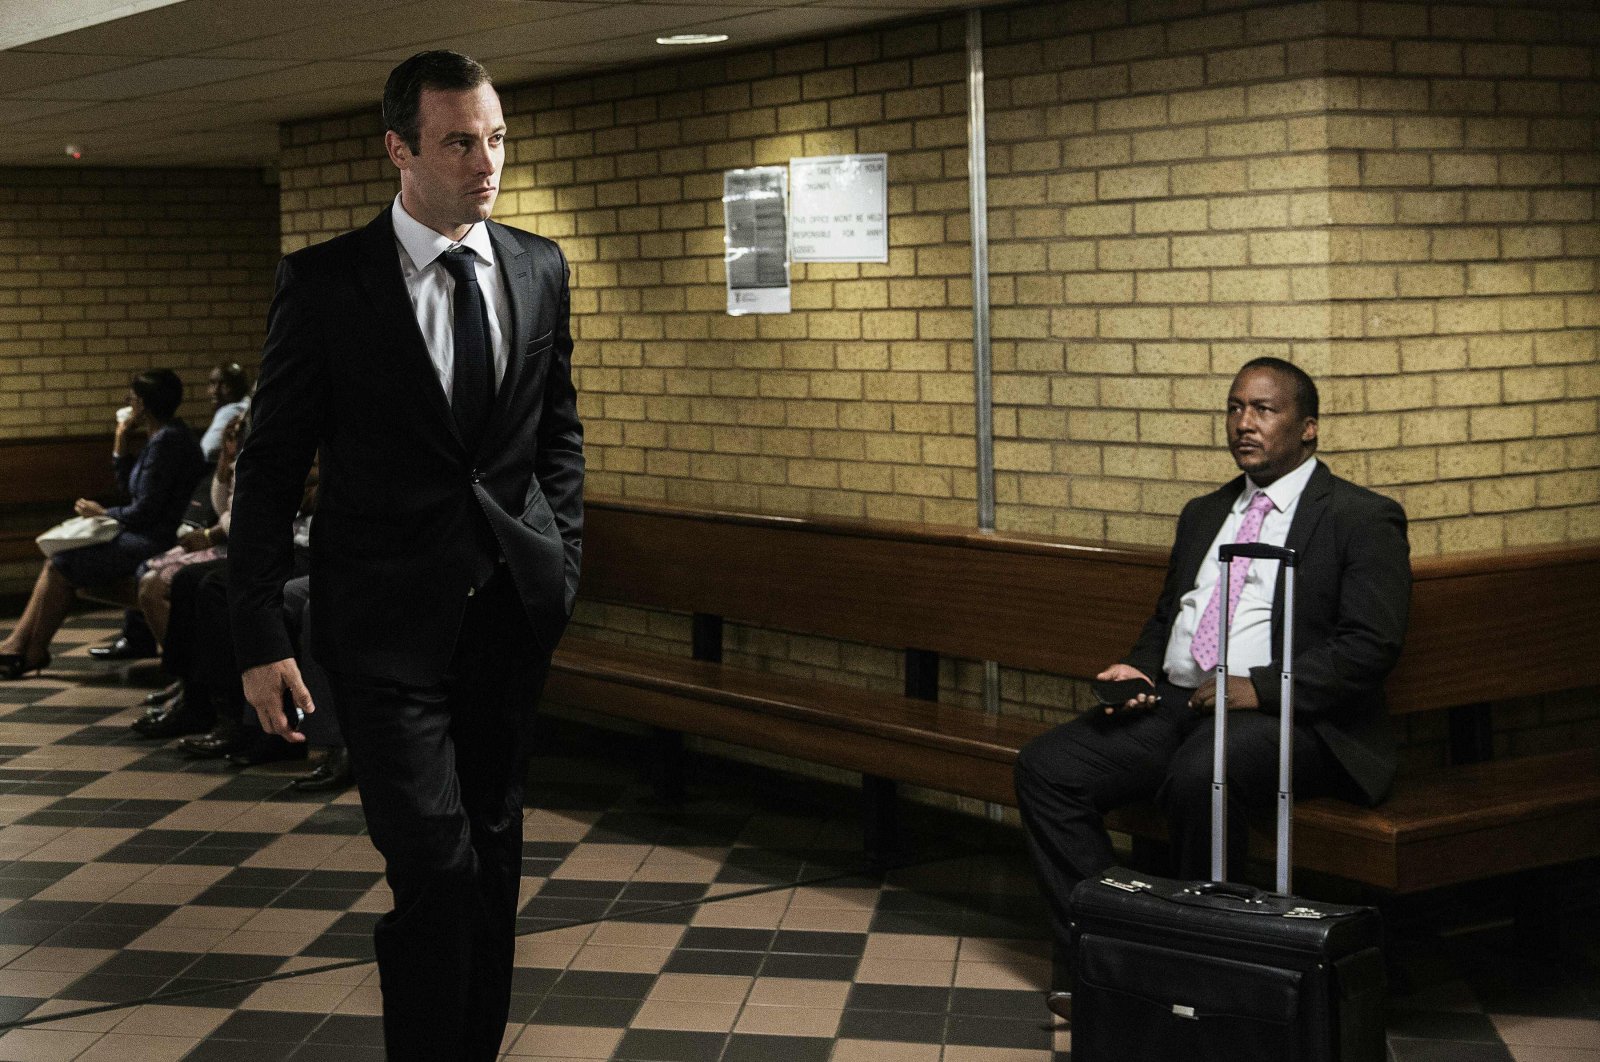 South African Paralympian Oscar Pistorius (L) arrives at Pretoria High Court for a postponement hearing in his murder case, Pretoria, South Africa, April 18, 2016. (AFP Photo)